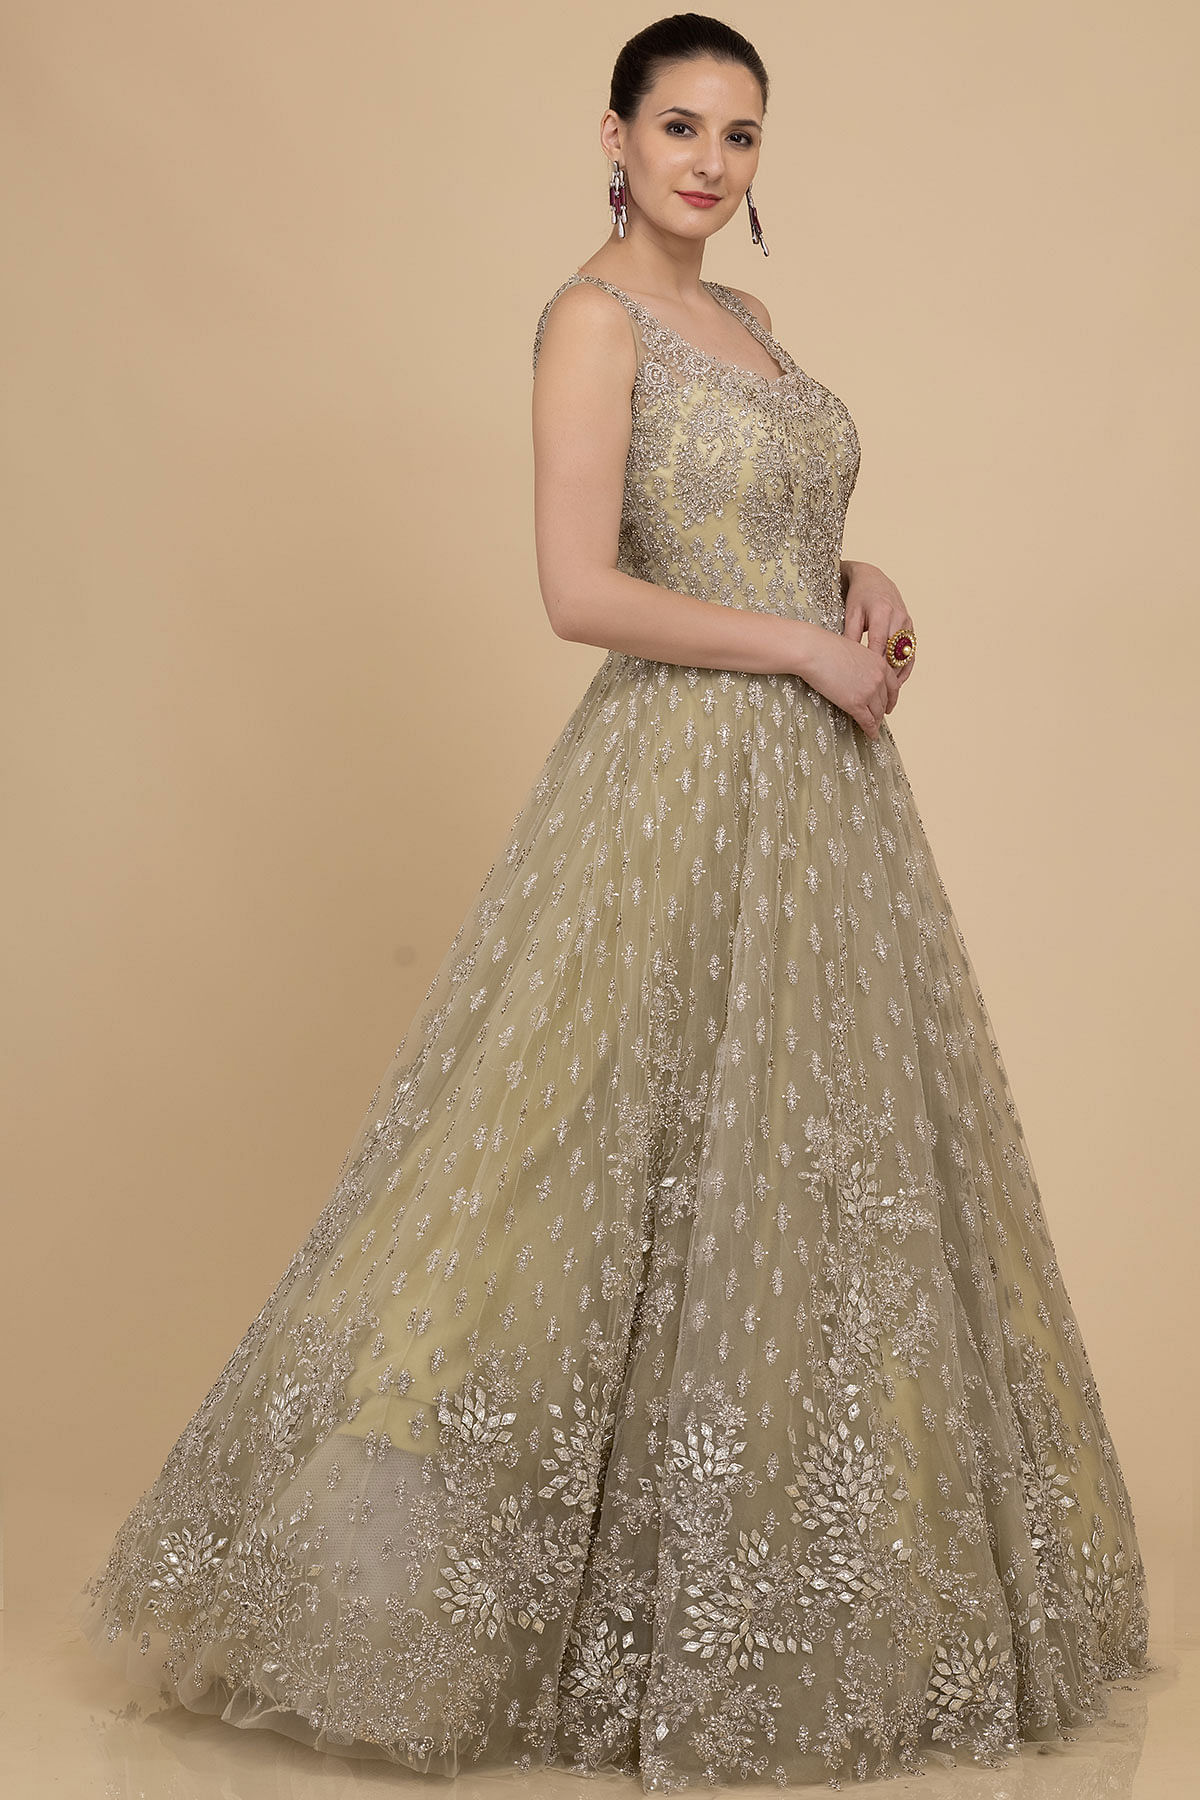 Gown Design From Net And Embroidery